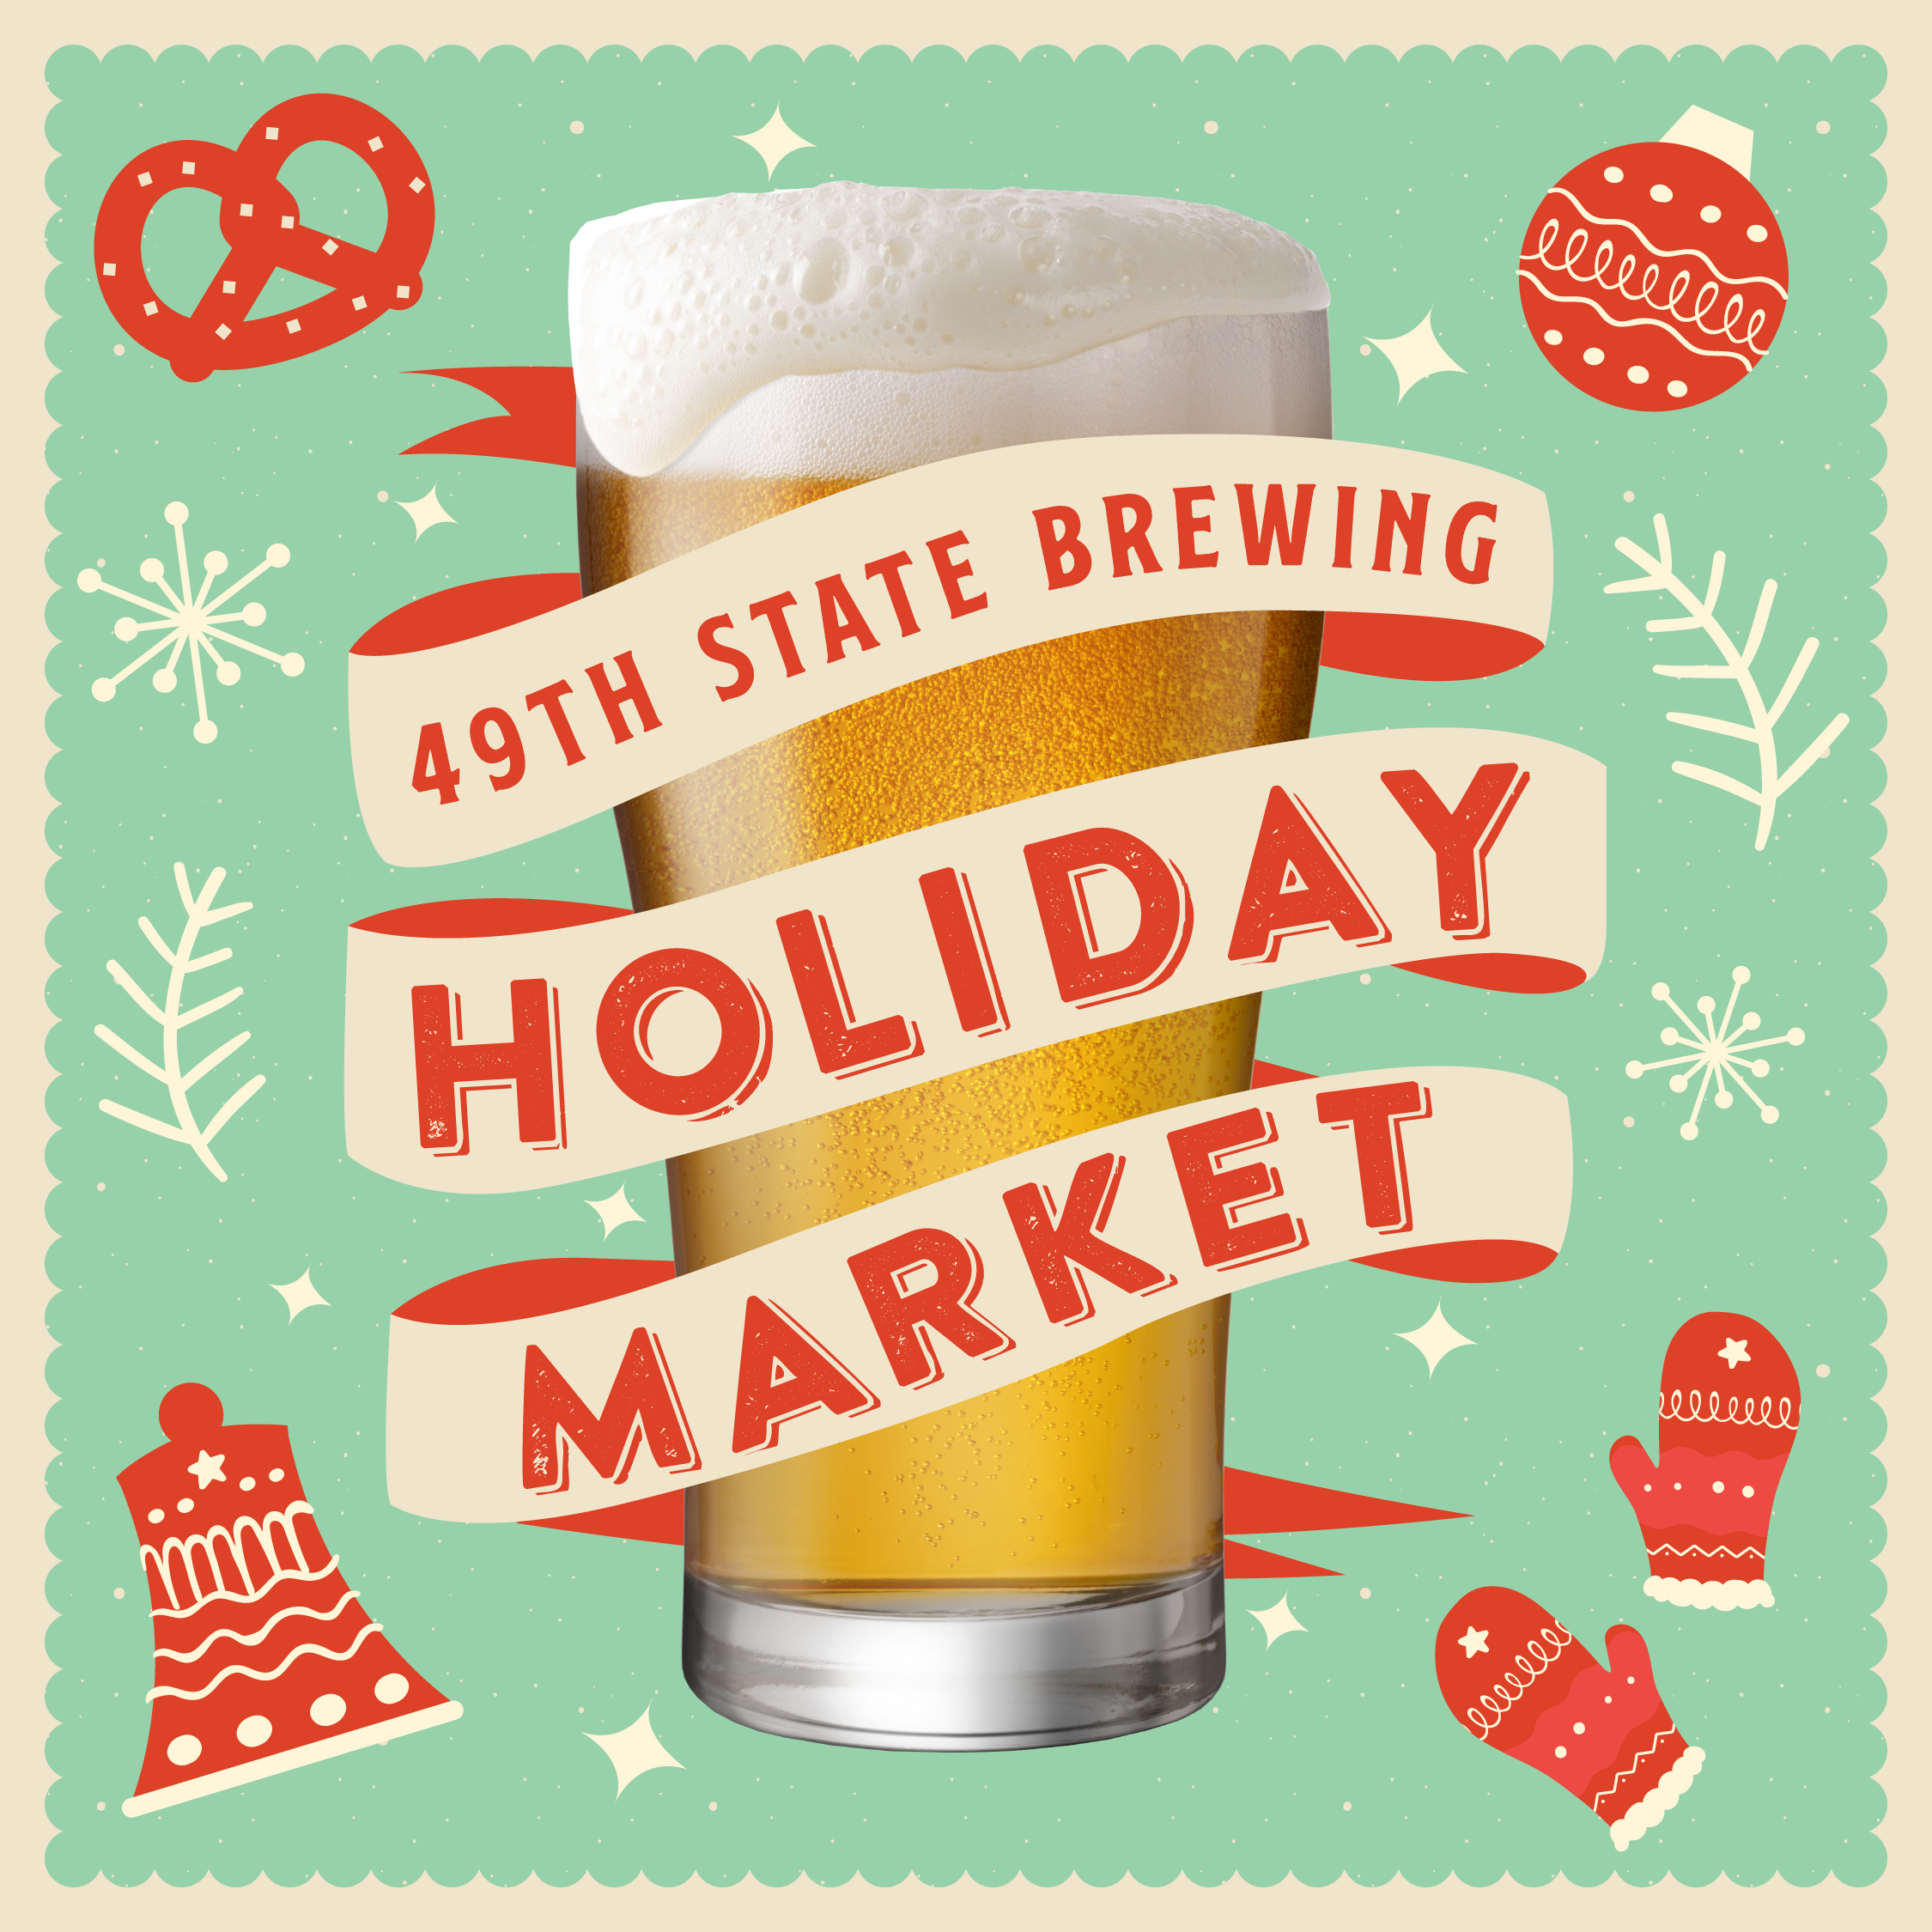 Our Best Holiday Market Yet